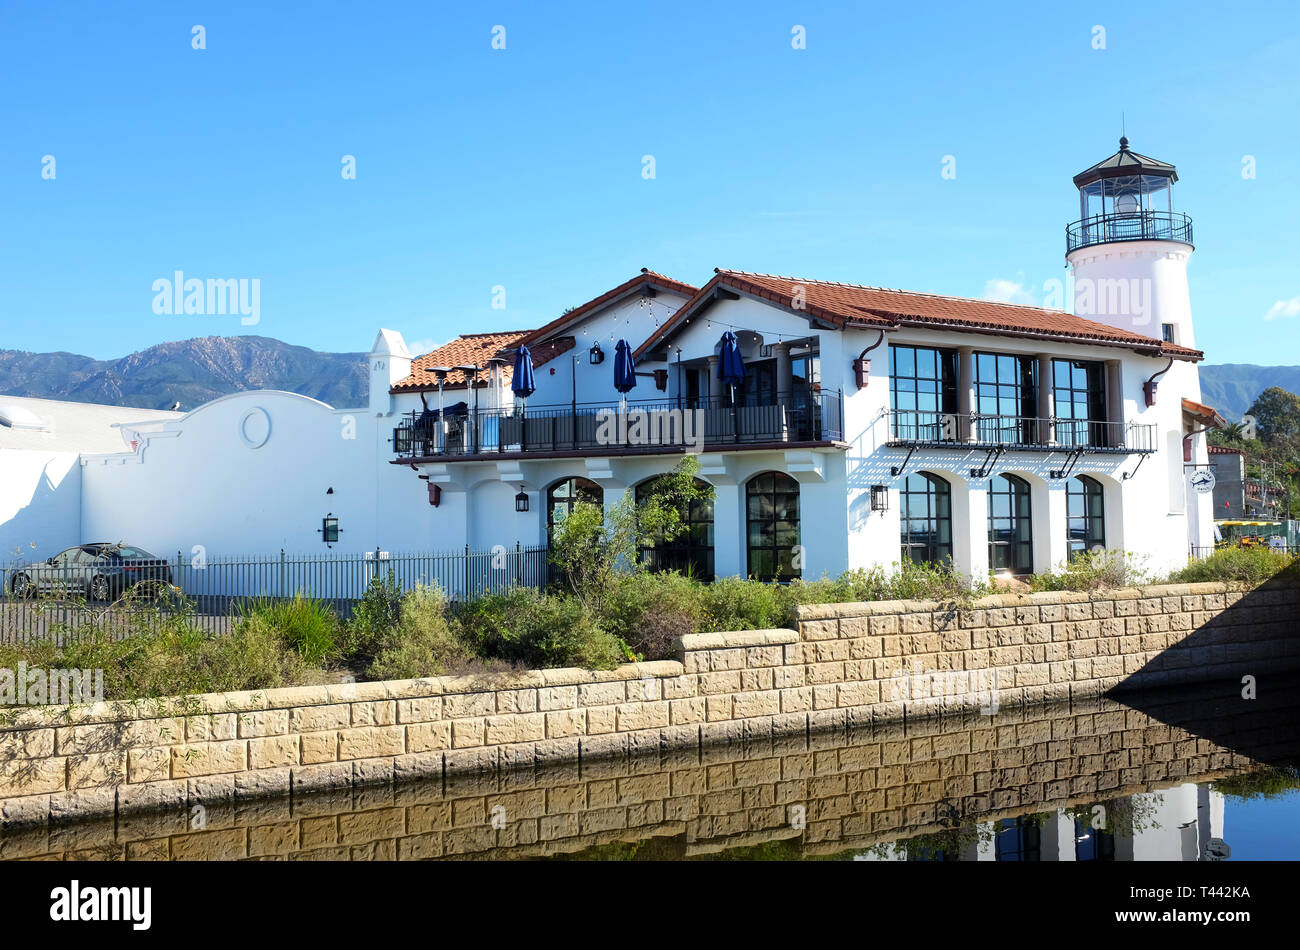 SANTA BARBARA, CALIFORNIA - APRIL 12, 2019: The Blue Water Grill restaurant at State Street and Cabrillo Boulevard offers seafood with harbor views. Stock Photo